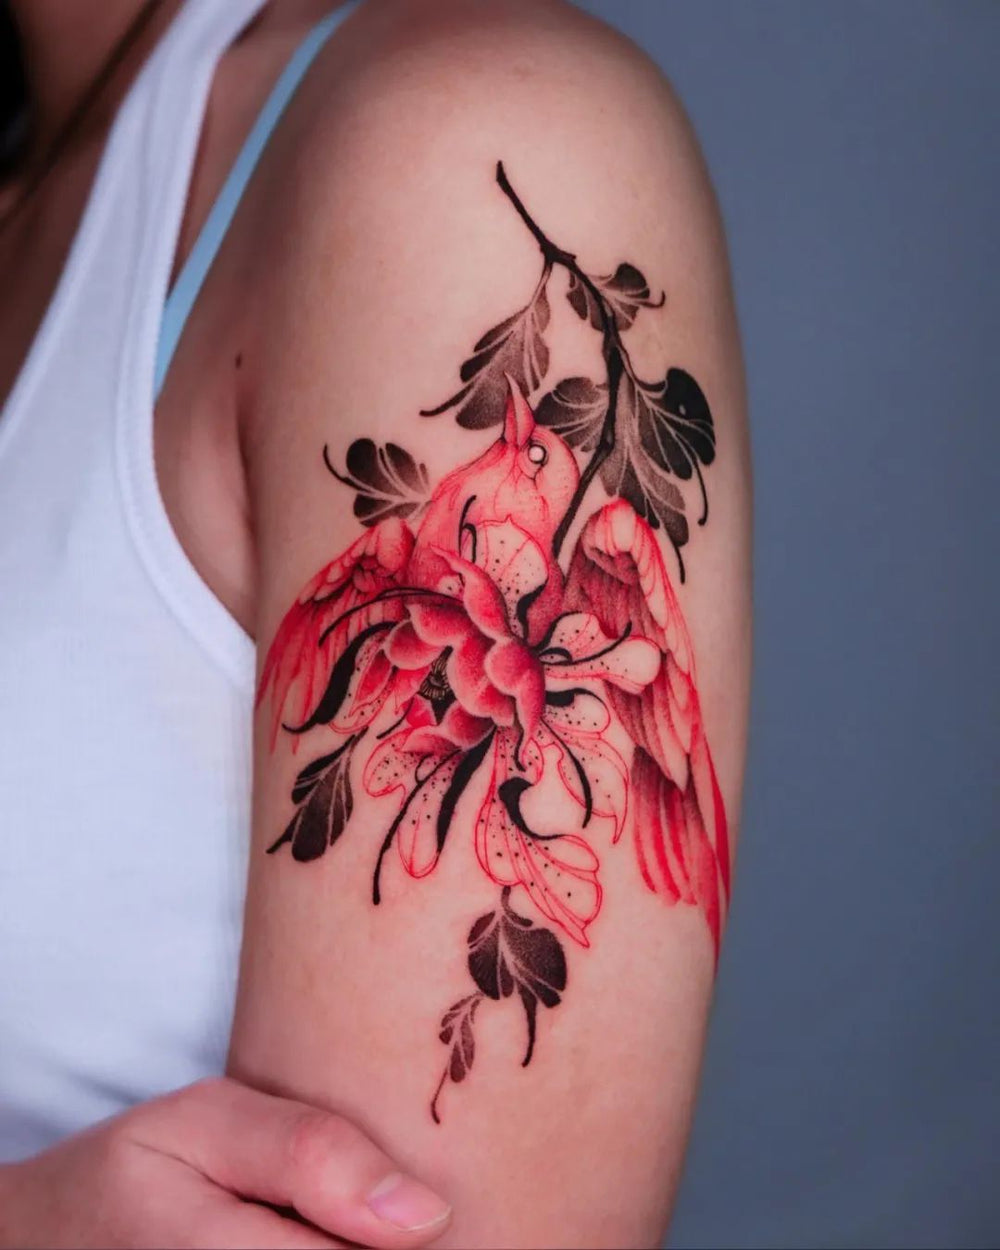 Tattoos may cause years of infection itching and swelling